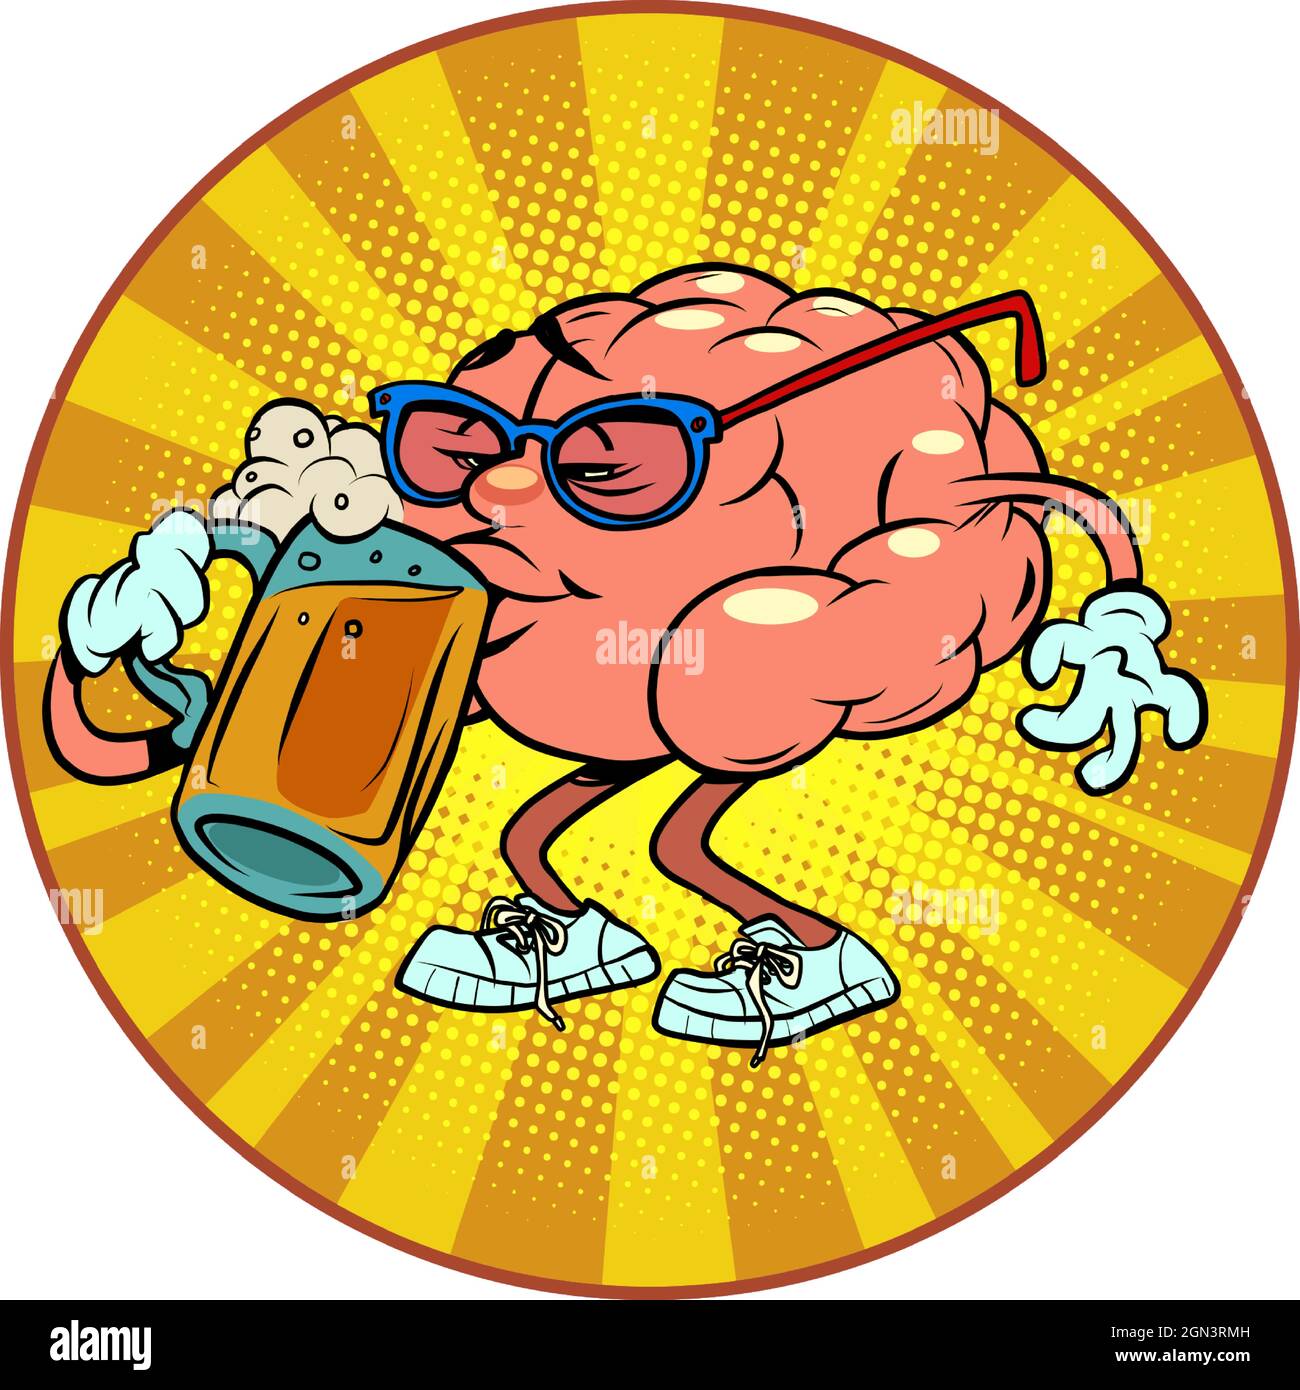 drinks beer at the bar human brain character, smart wise Stock Vector